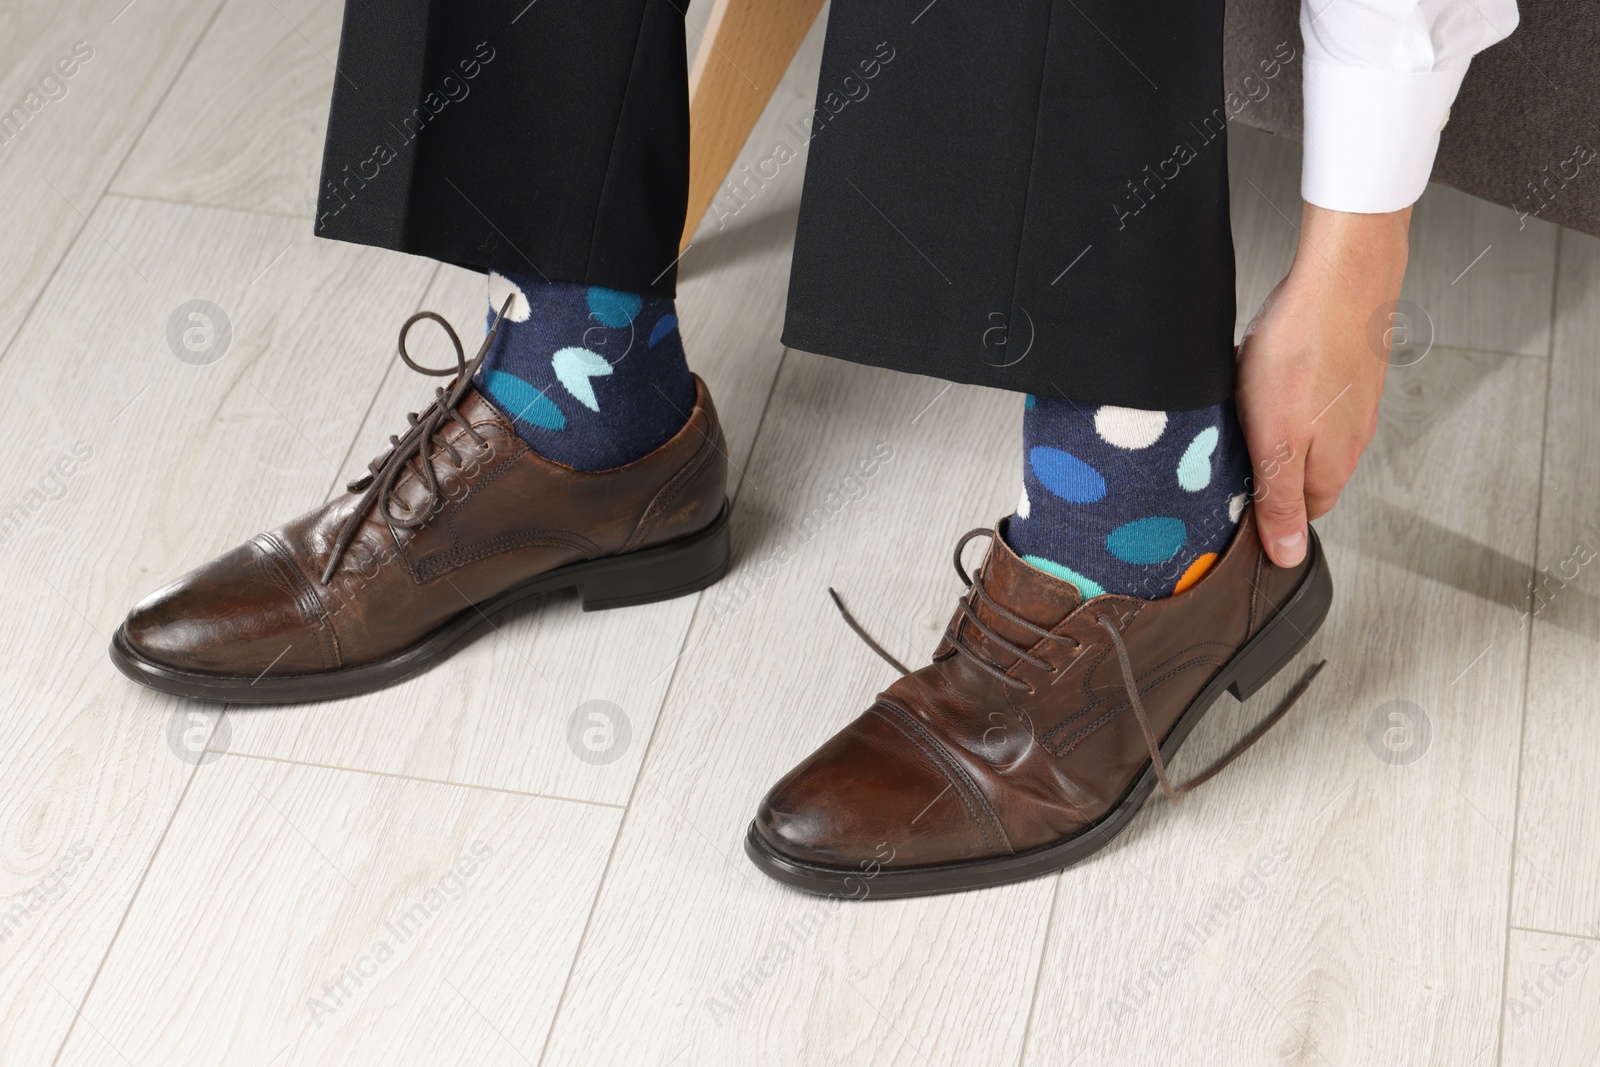 Photo of Man with colorful socks putting on stylish shoes indoors, closeup